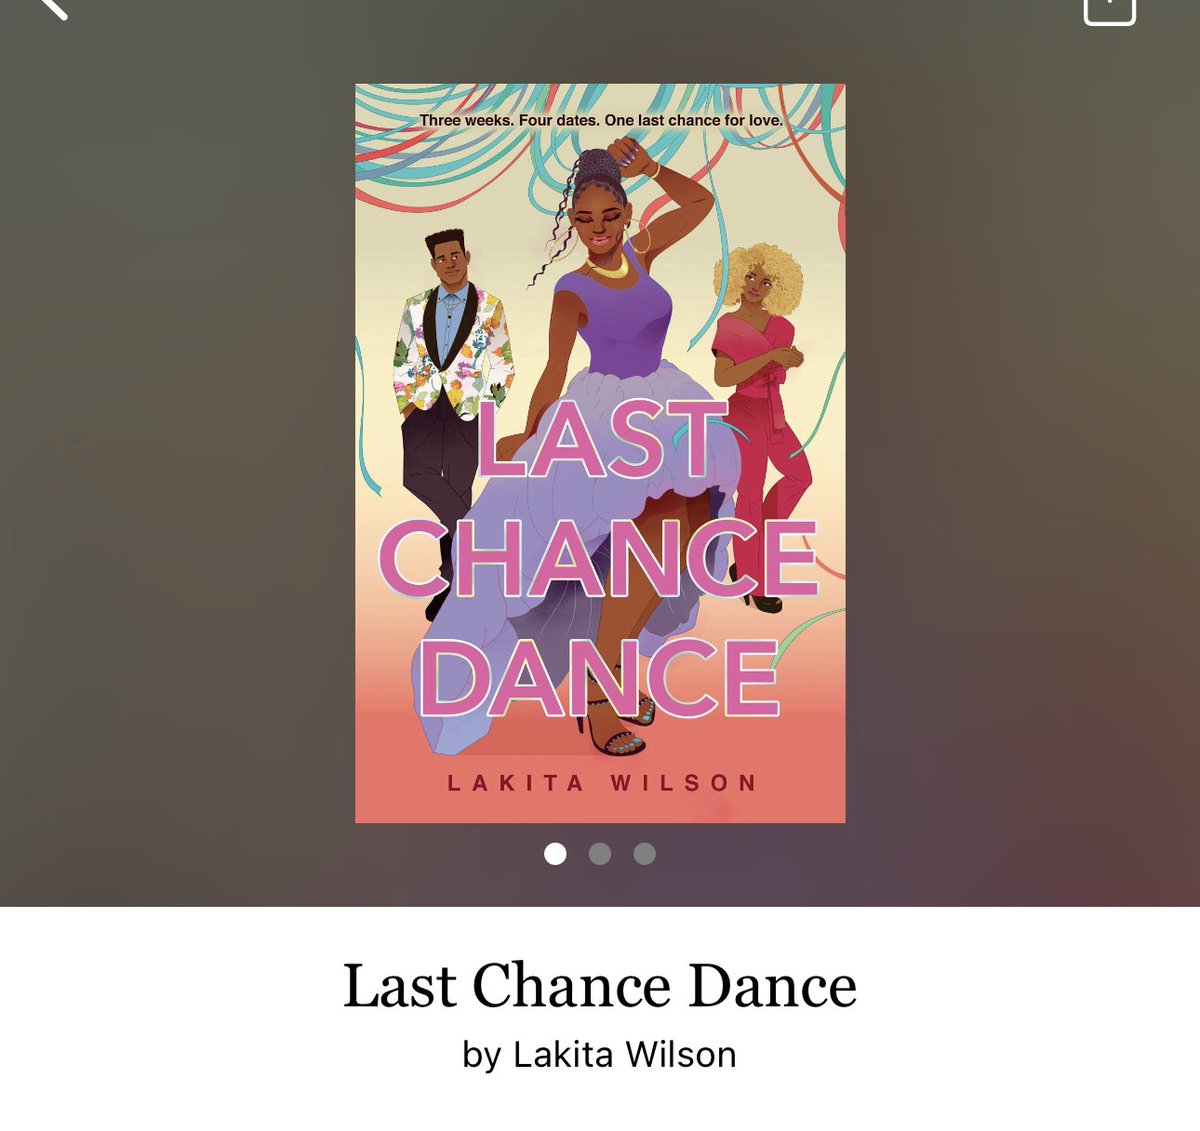 Last Chance Dance by Lakita Wilson 

#LastChanceDance by #LakitaWilson #4829 #36chapters #336pages #April2023 #372of400 #Audiobook #78for20 #8hourAudiobook #leilaAndTre #clearingoffreadingshelves #whatsNext #readitquick